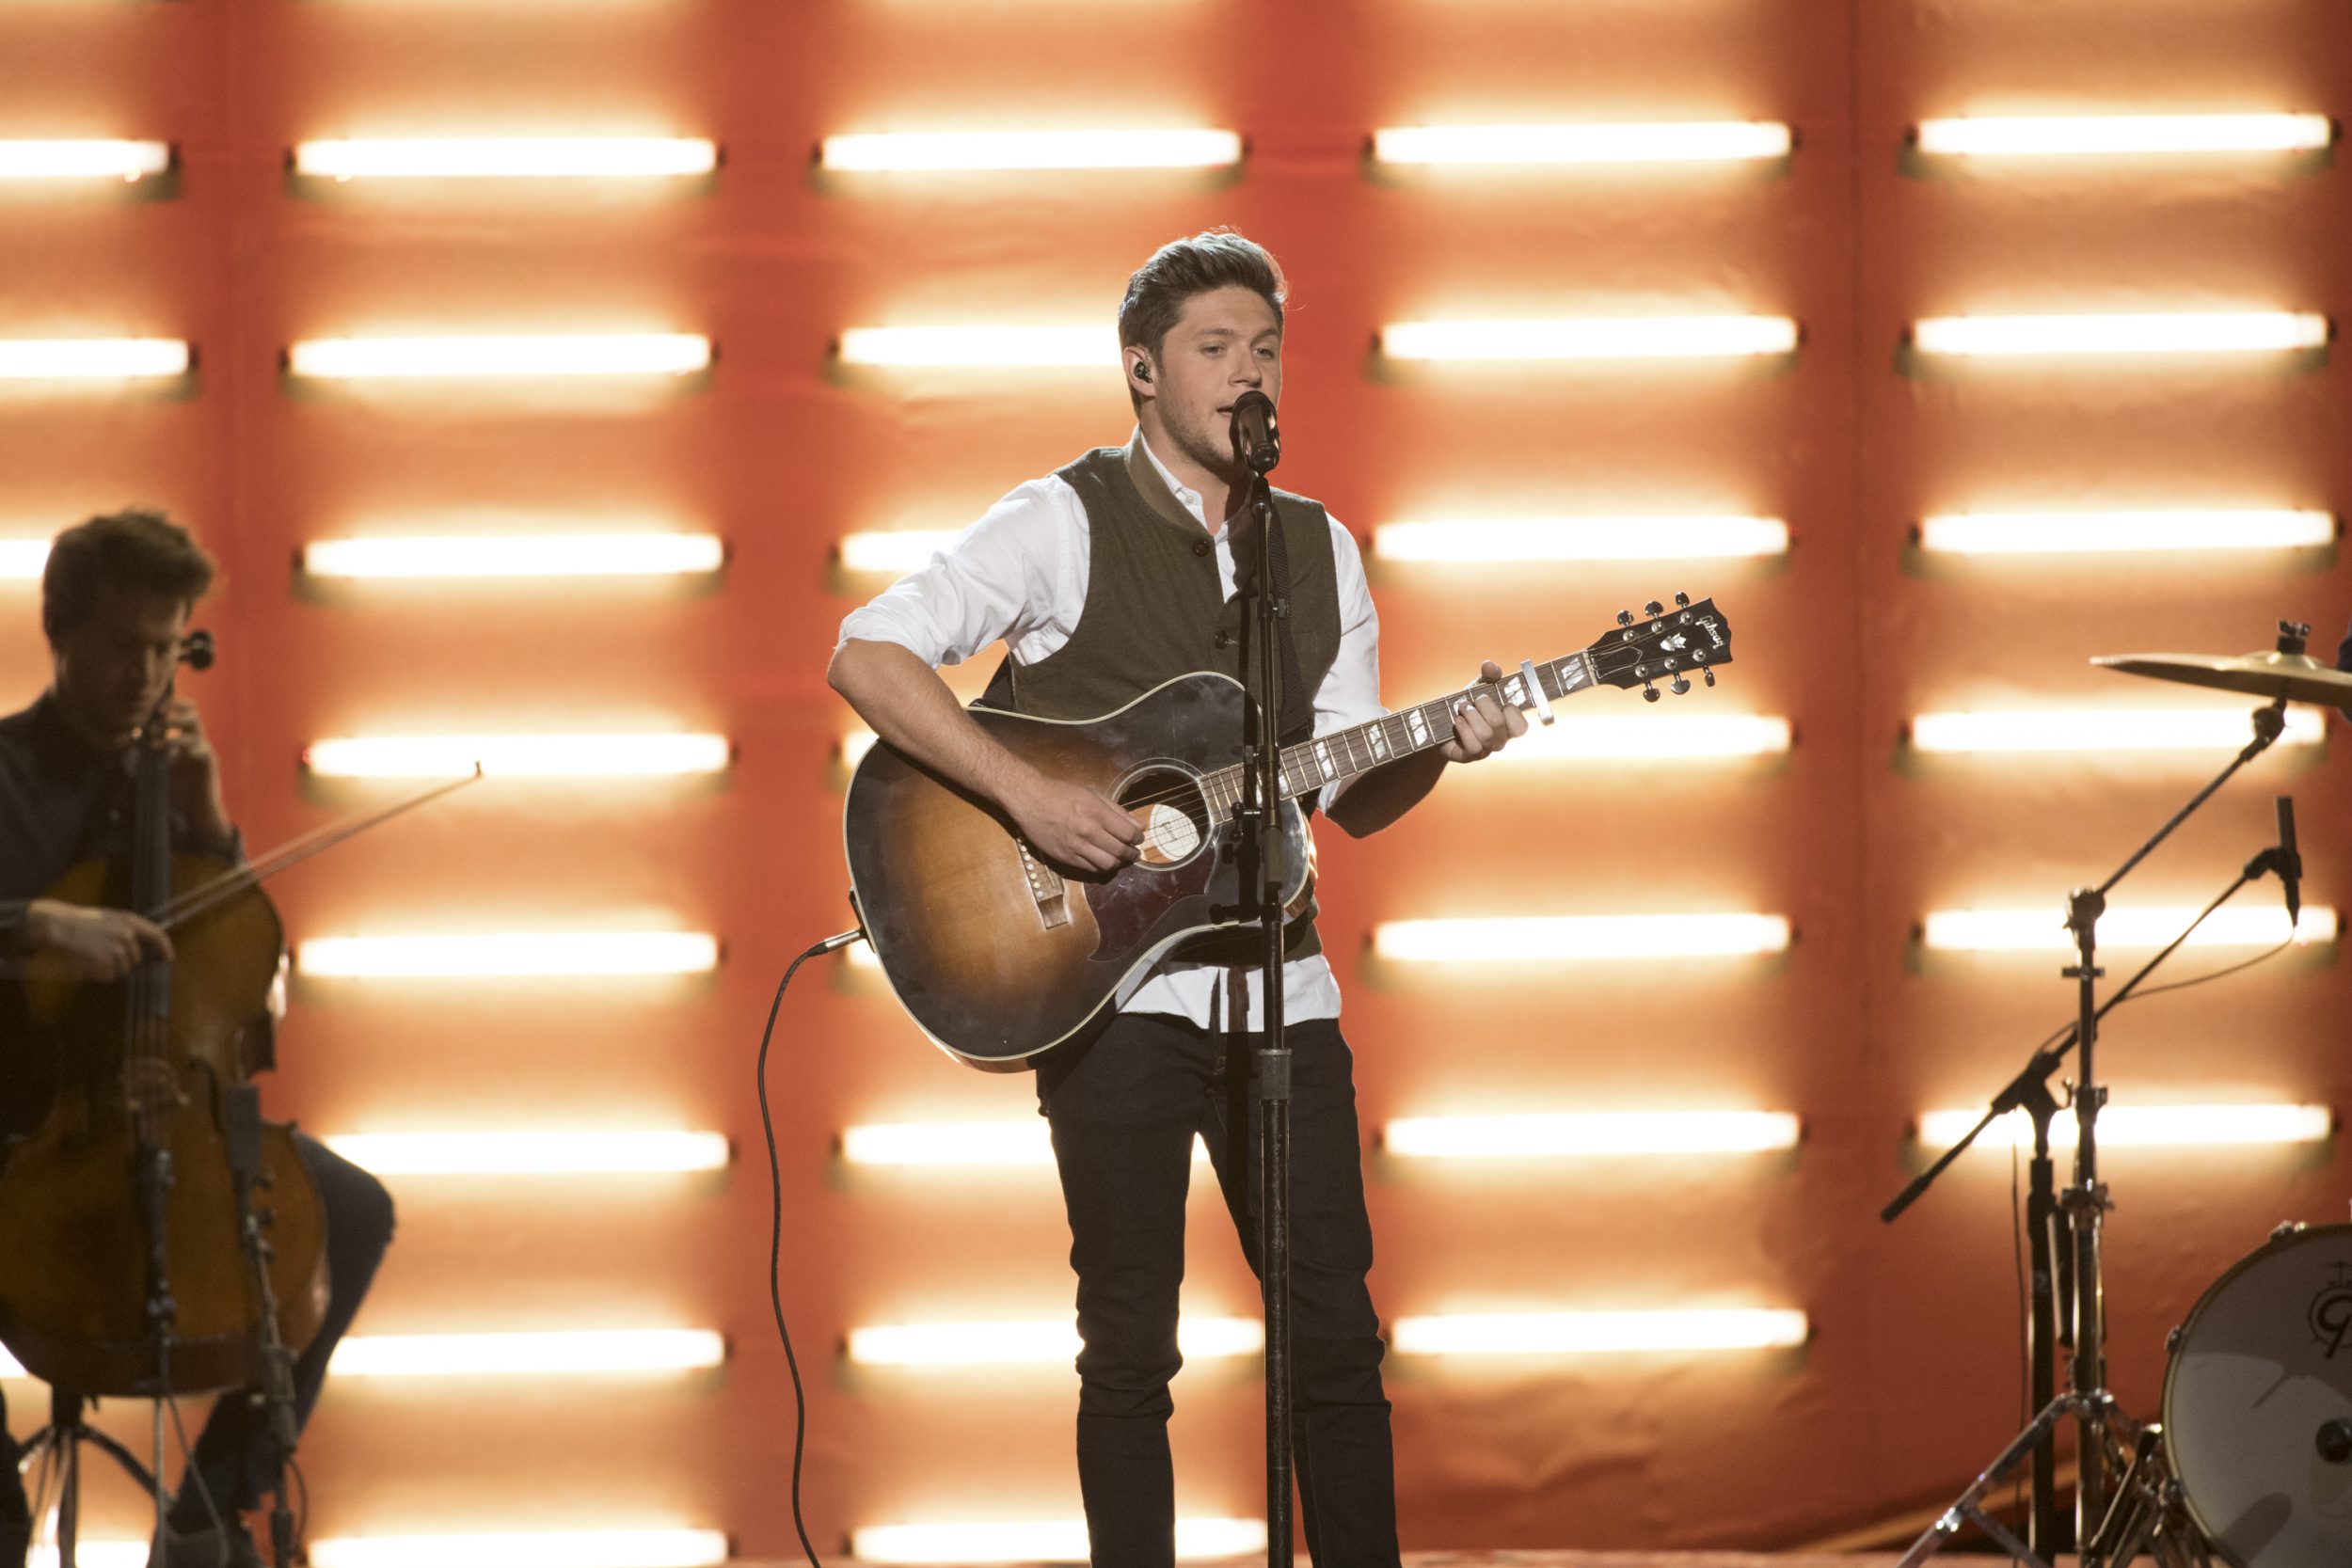 THE 2016 AMERICAN MUSIC AWARDS(r) - The “2016 American Music Awards,” the world’s biggest fan-voted award show, broadcasts live from the Microsoft Theater in Los Angeles on SUNDAY, NOVEMBER 20, at 8:00 p.m. EST, on ABC. (Image Group LA/ABC) NIALL HORAN